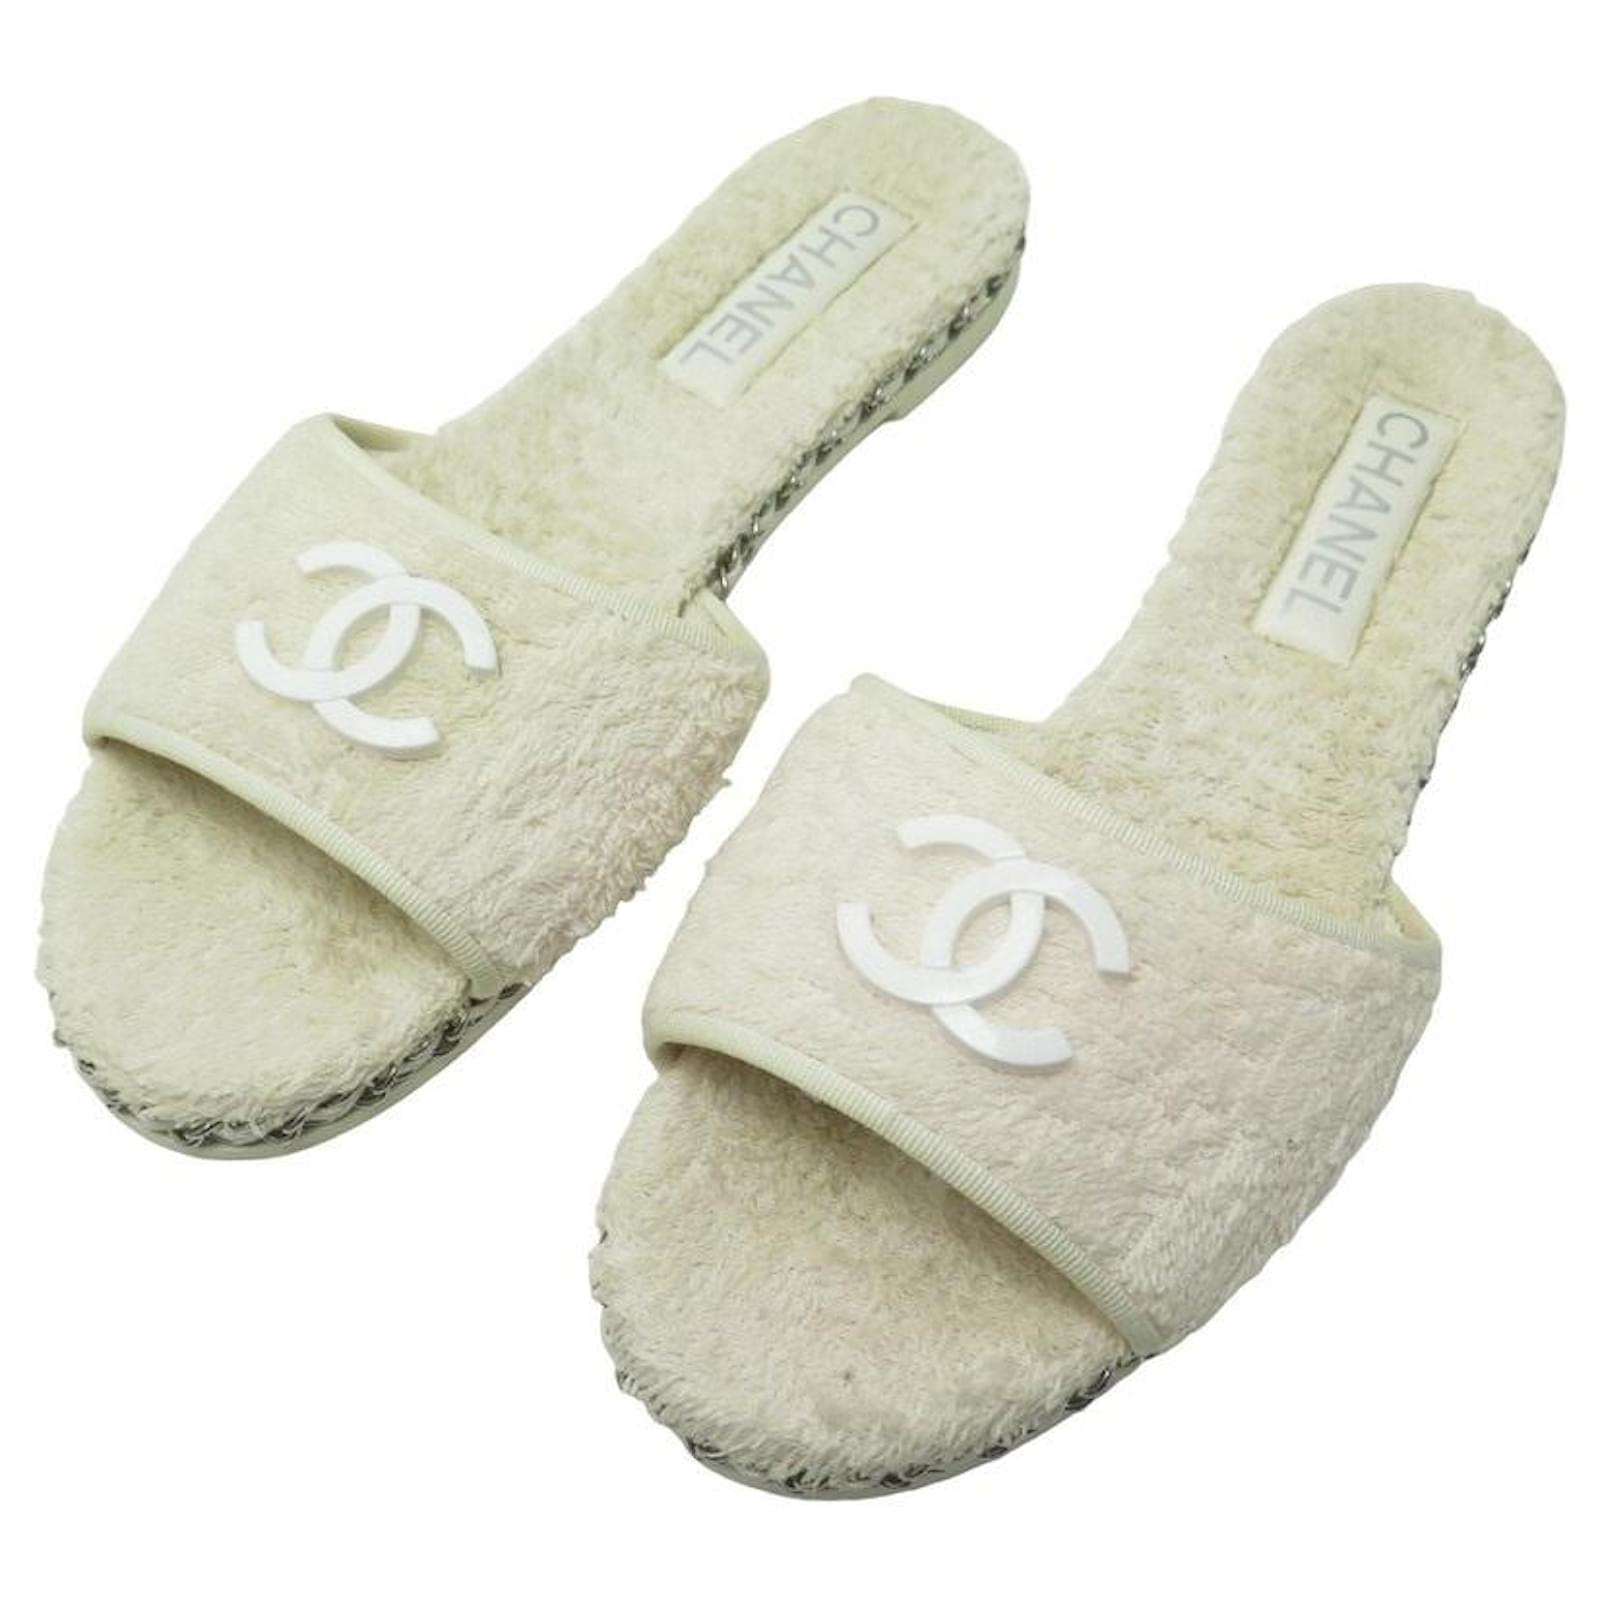 chanel sandals slip on shoes